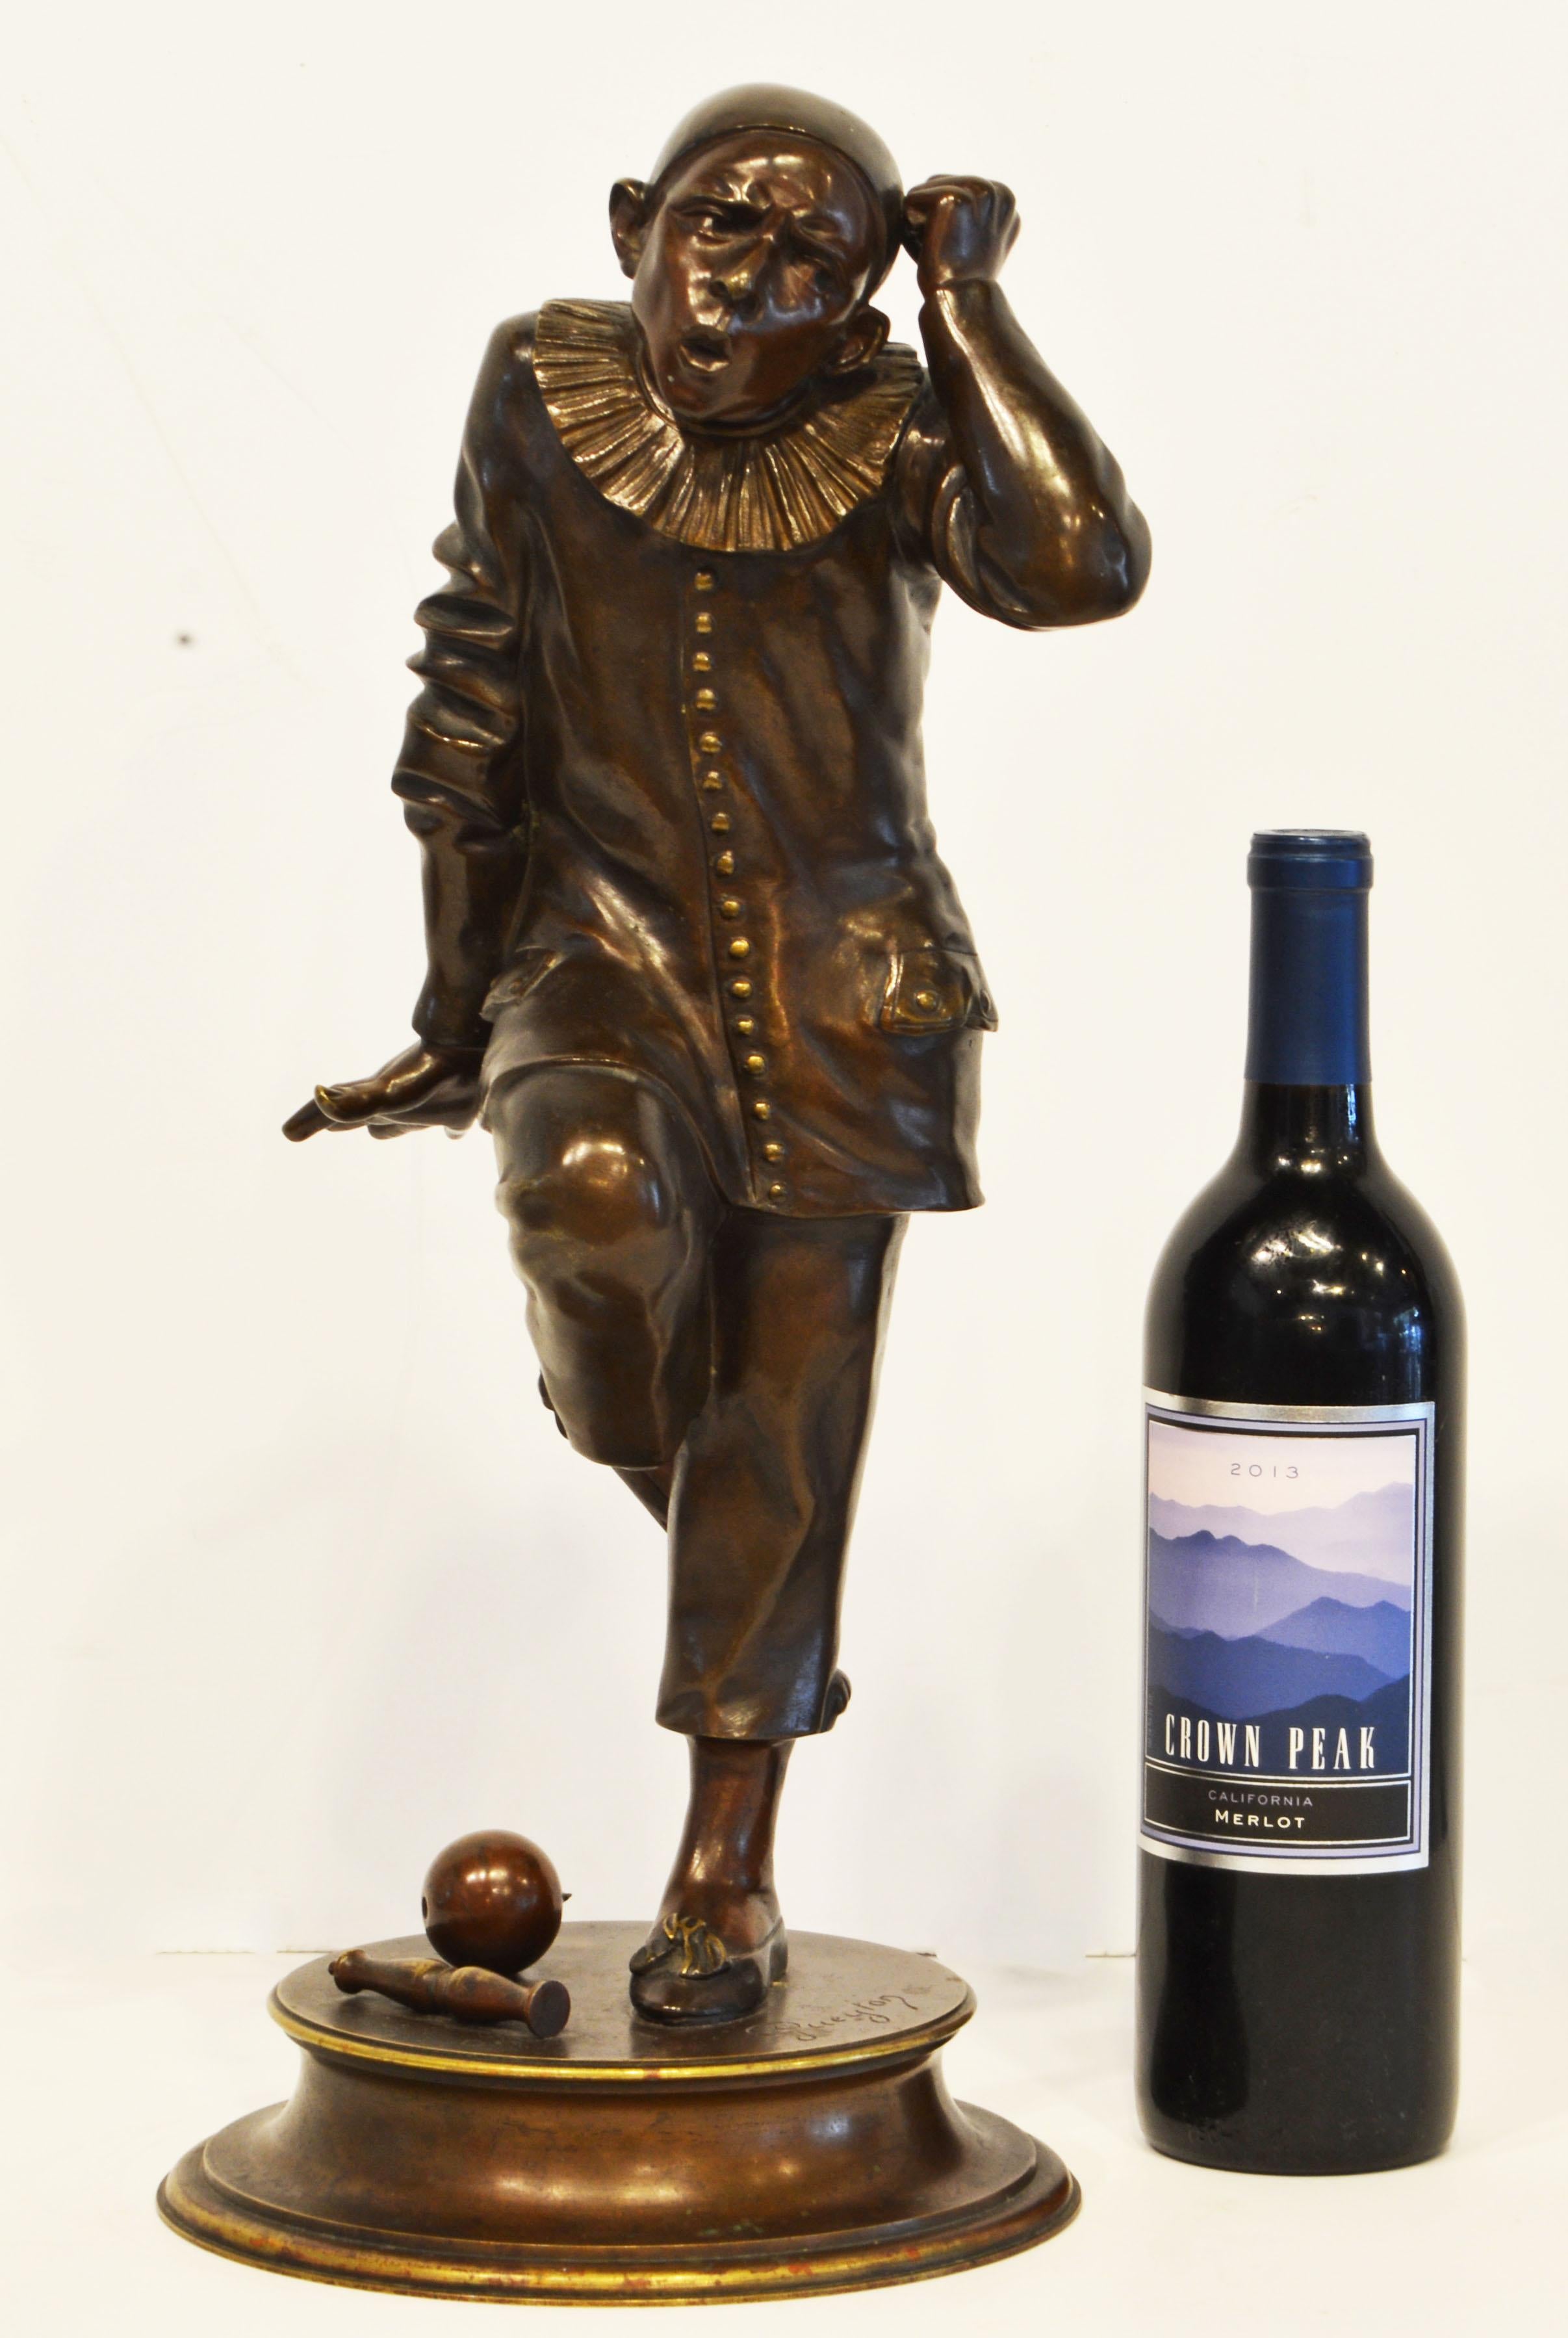 Bronze Sculpture of a Posing Jester or Harlequin by French Sculptor G. Gueyton 5